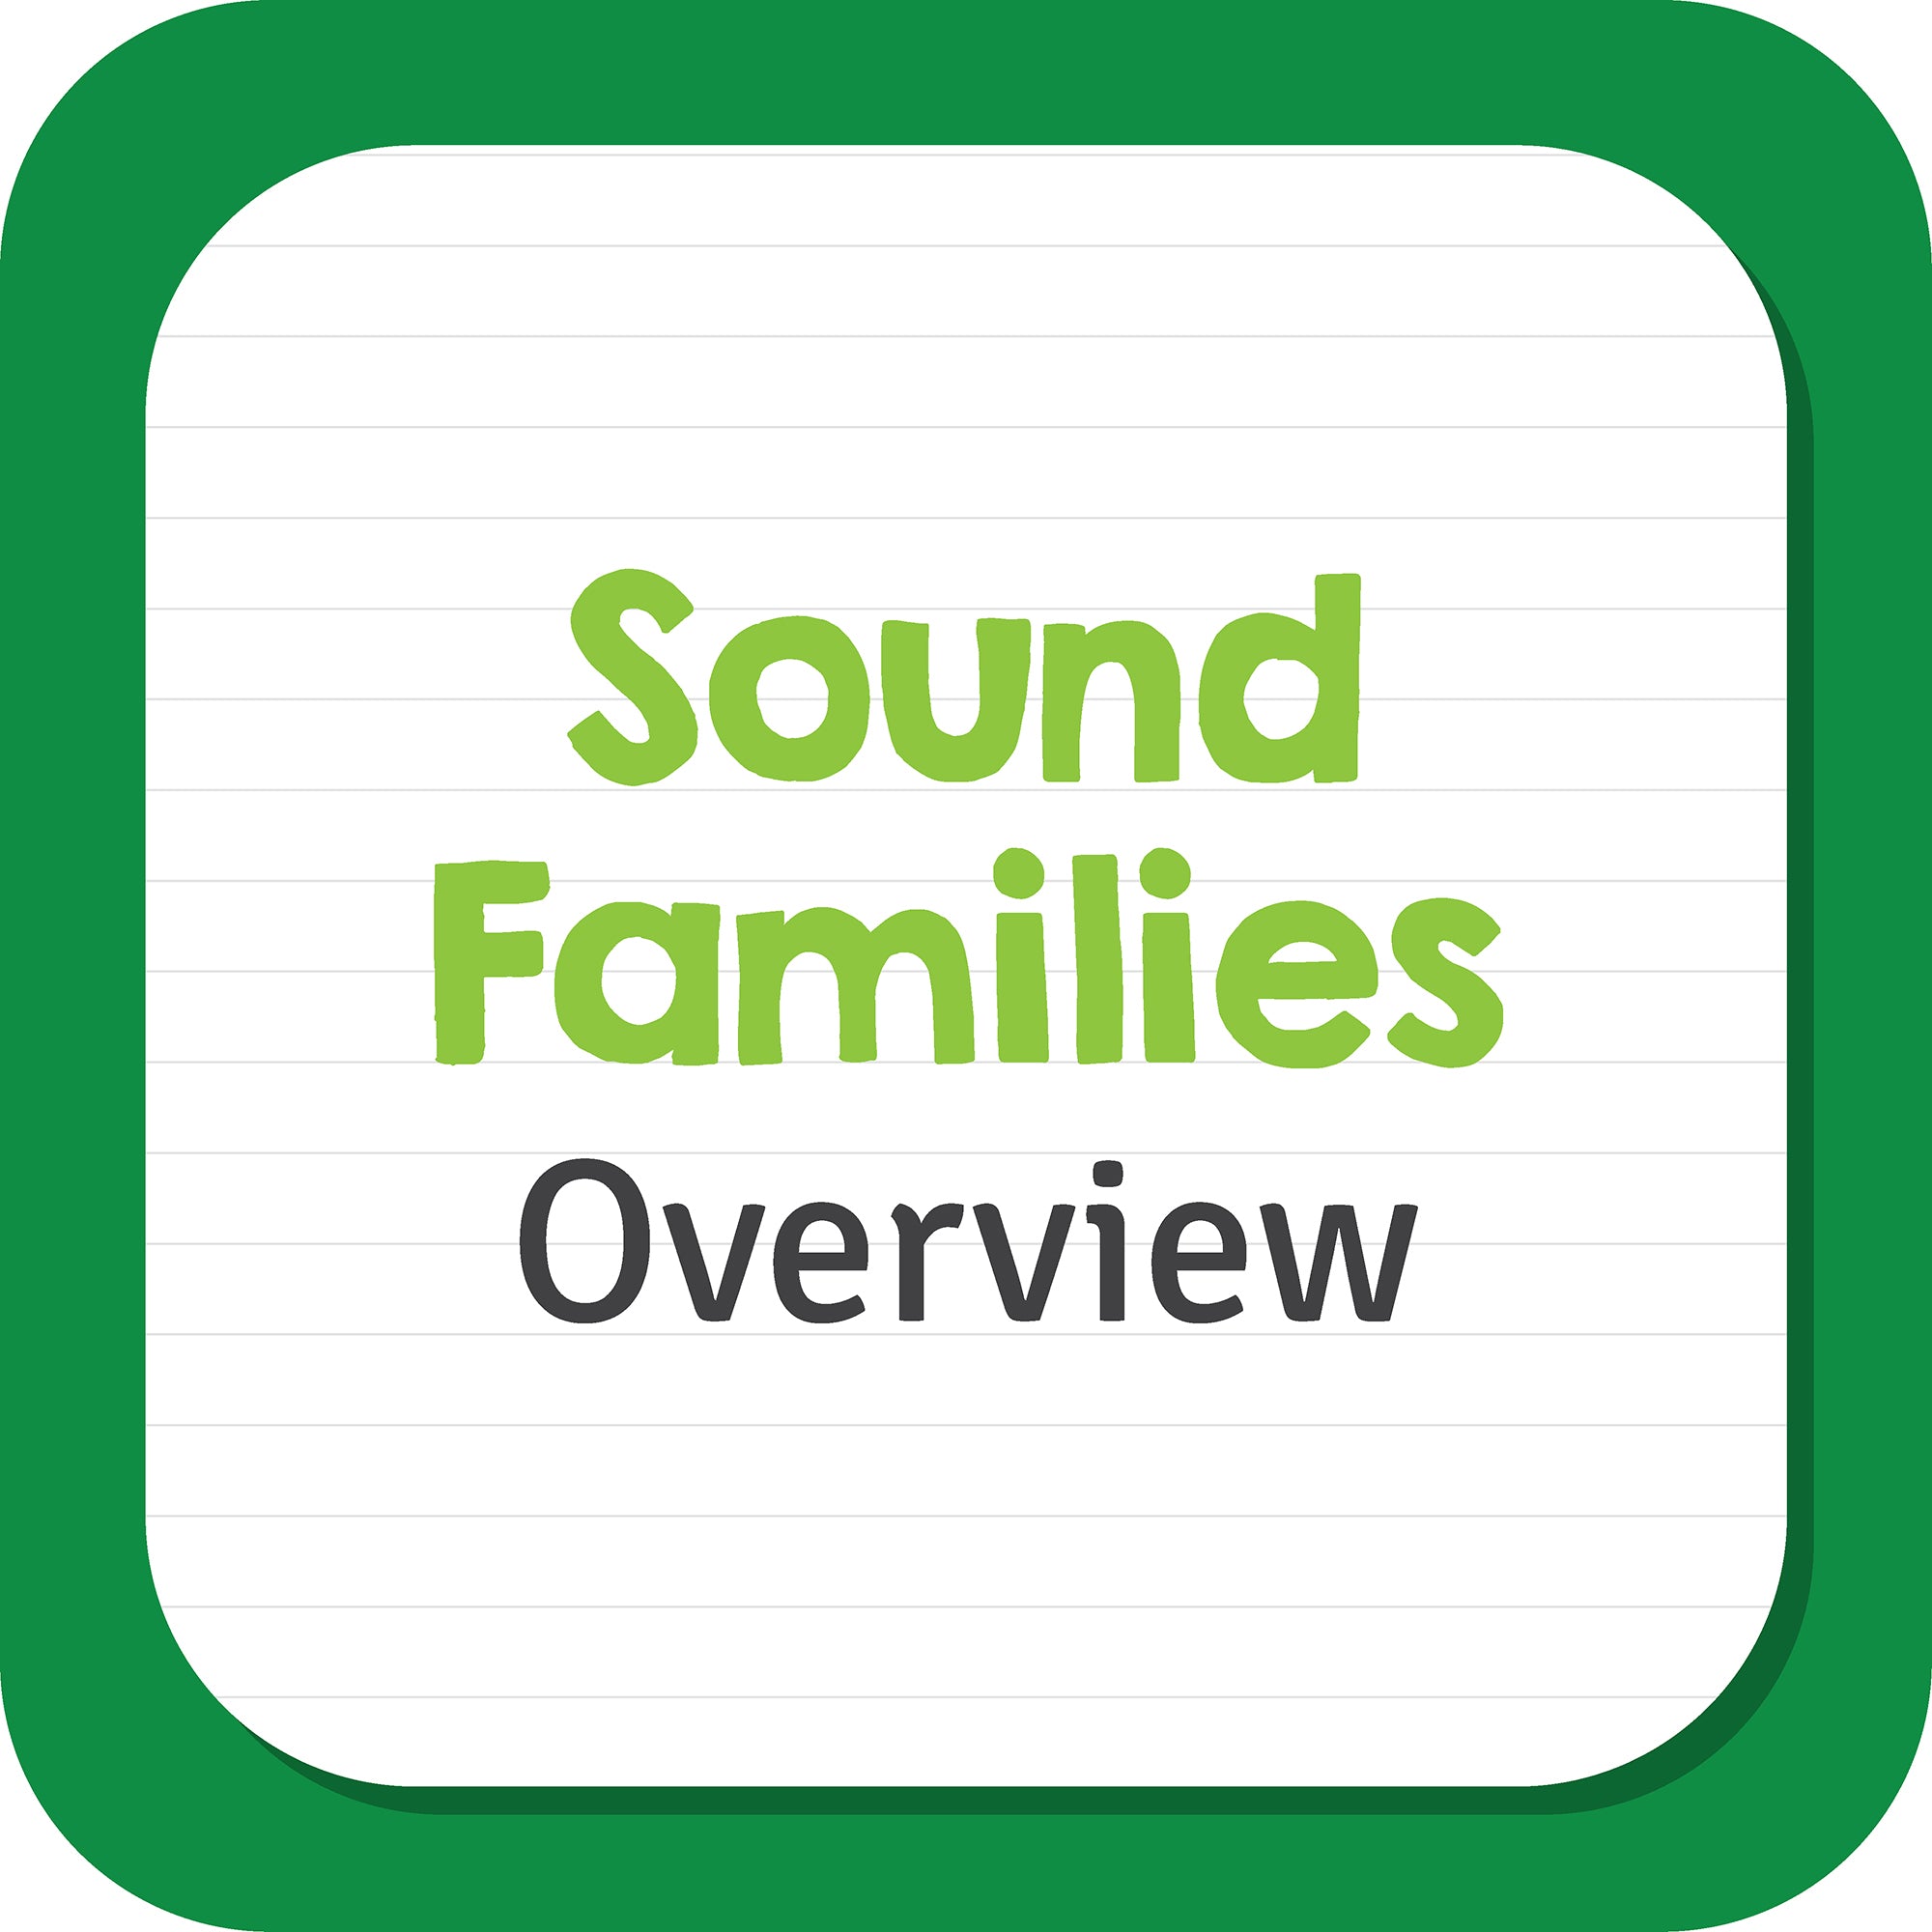 Sound Families Overview